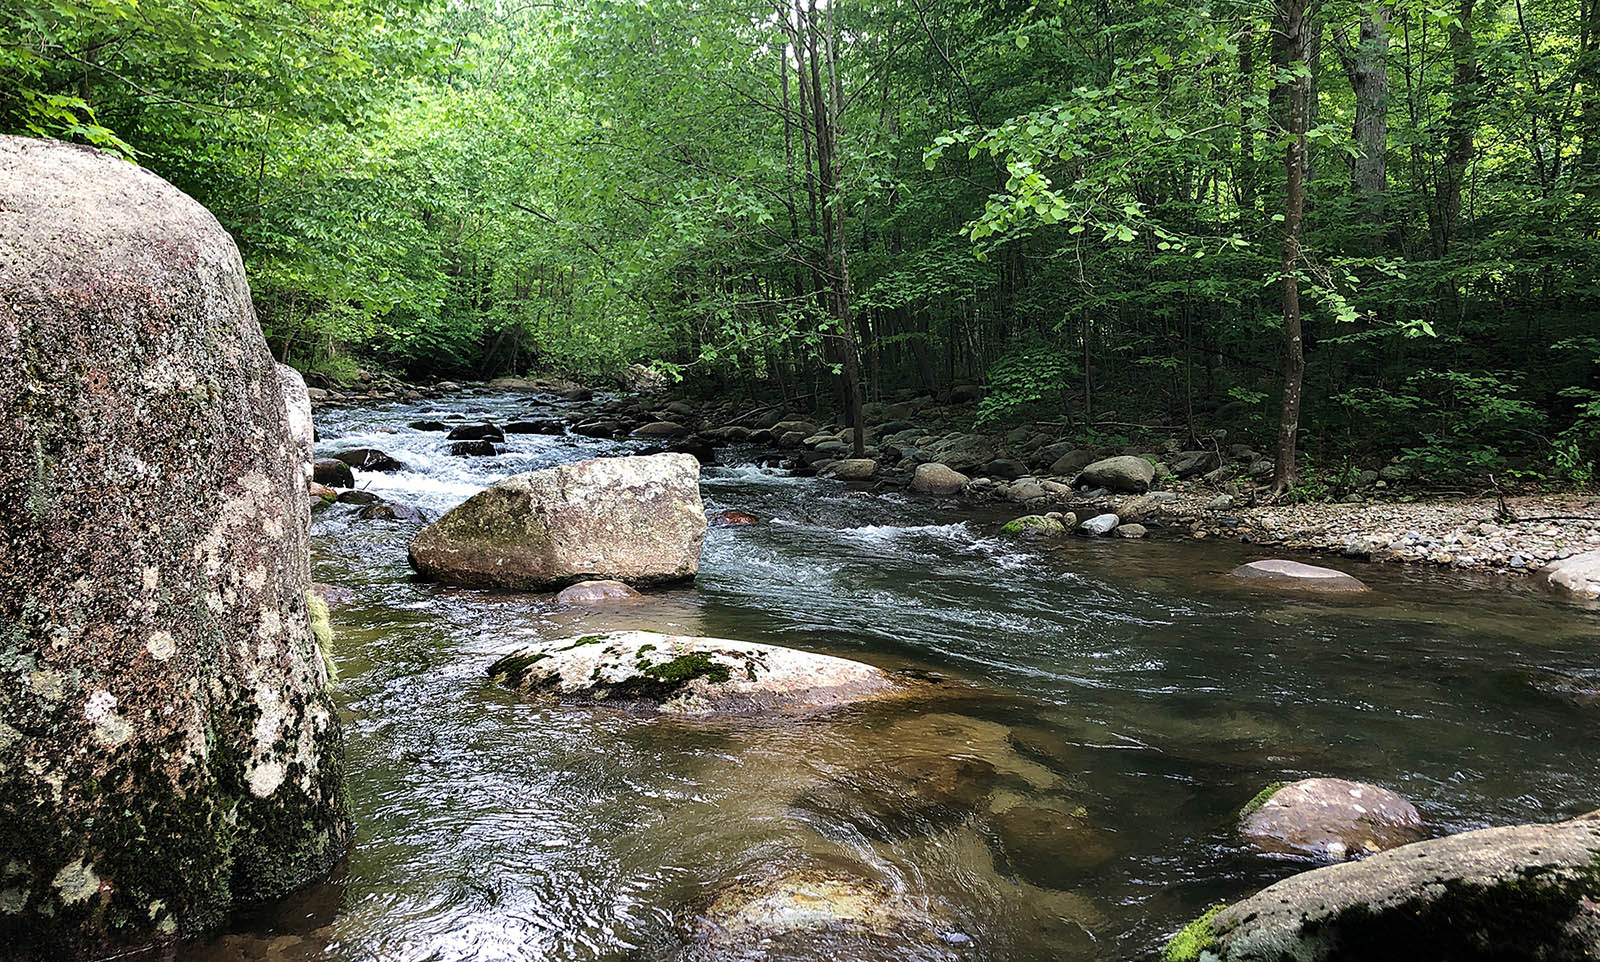 A beautiful photo of a river tumbling past rocks, with green-leaved trees on the banks.